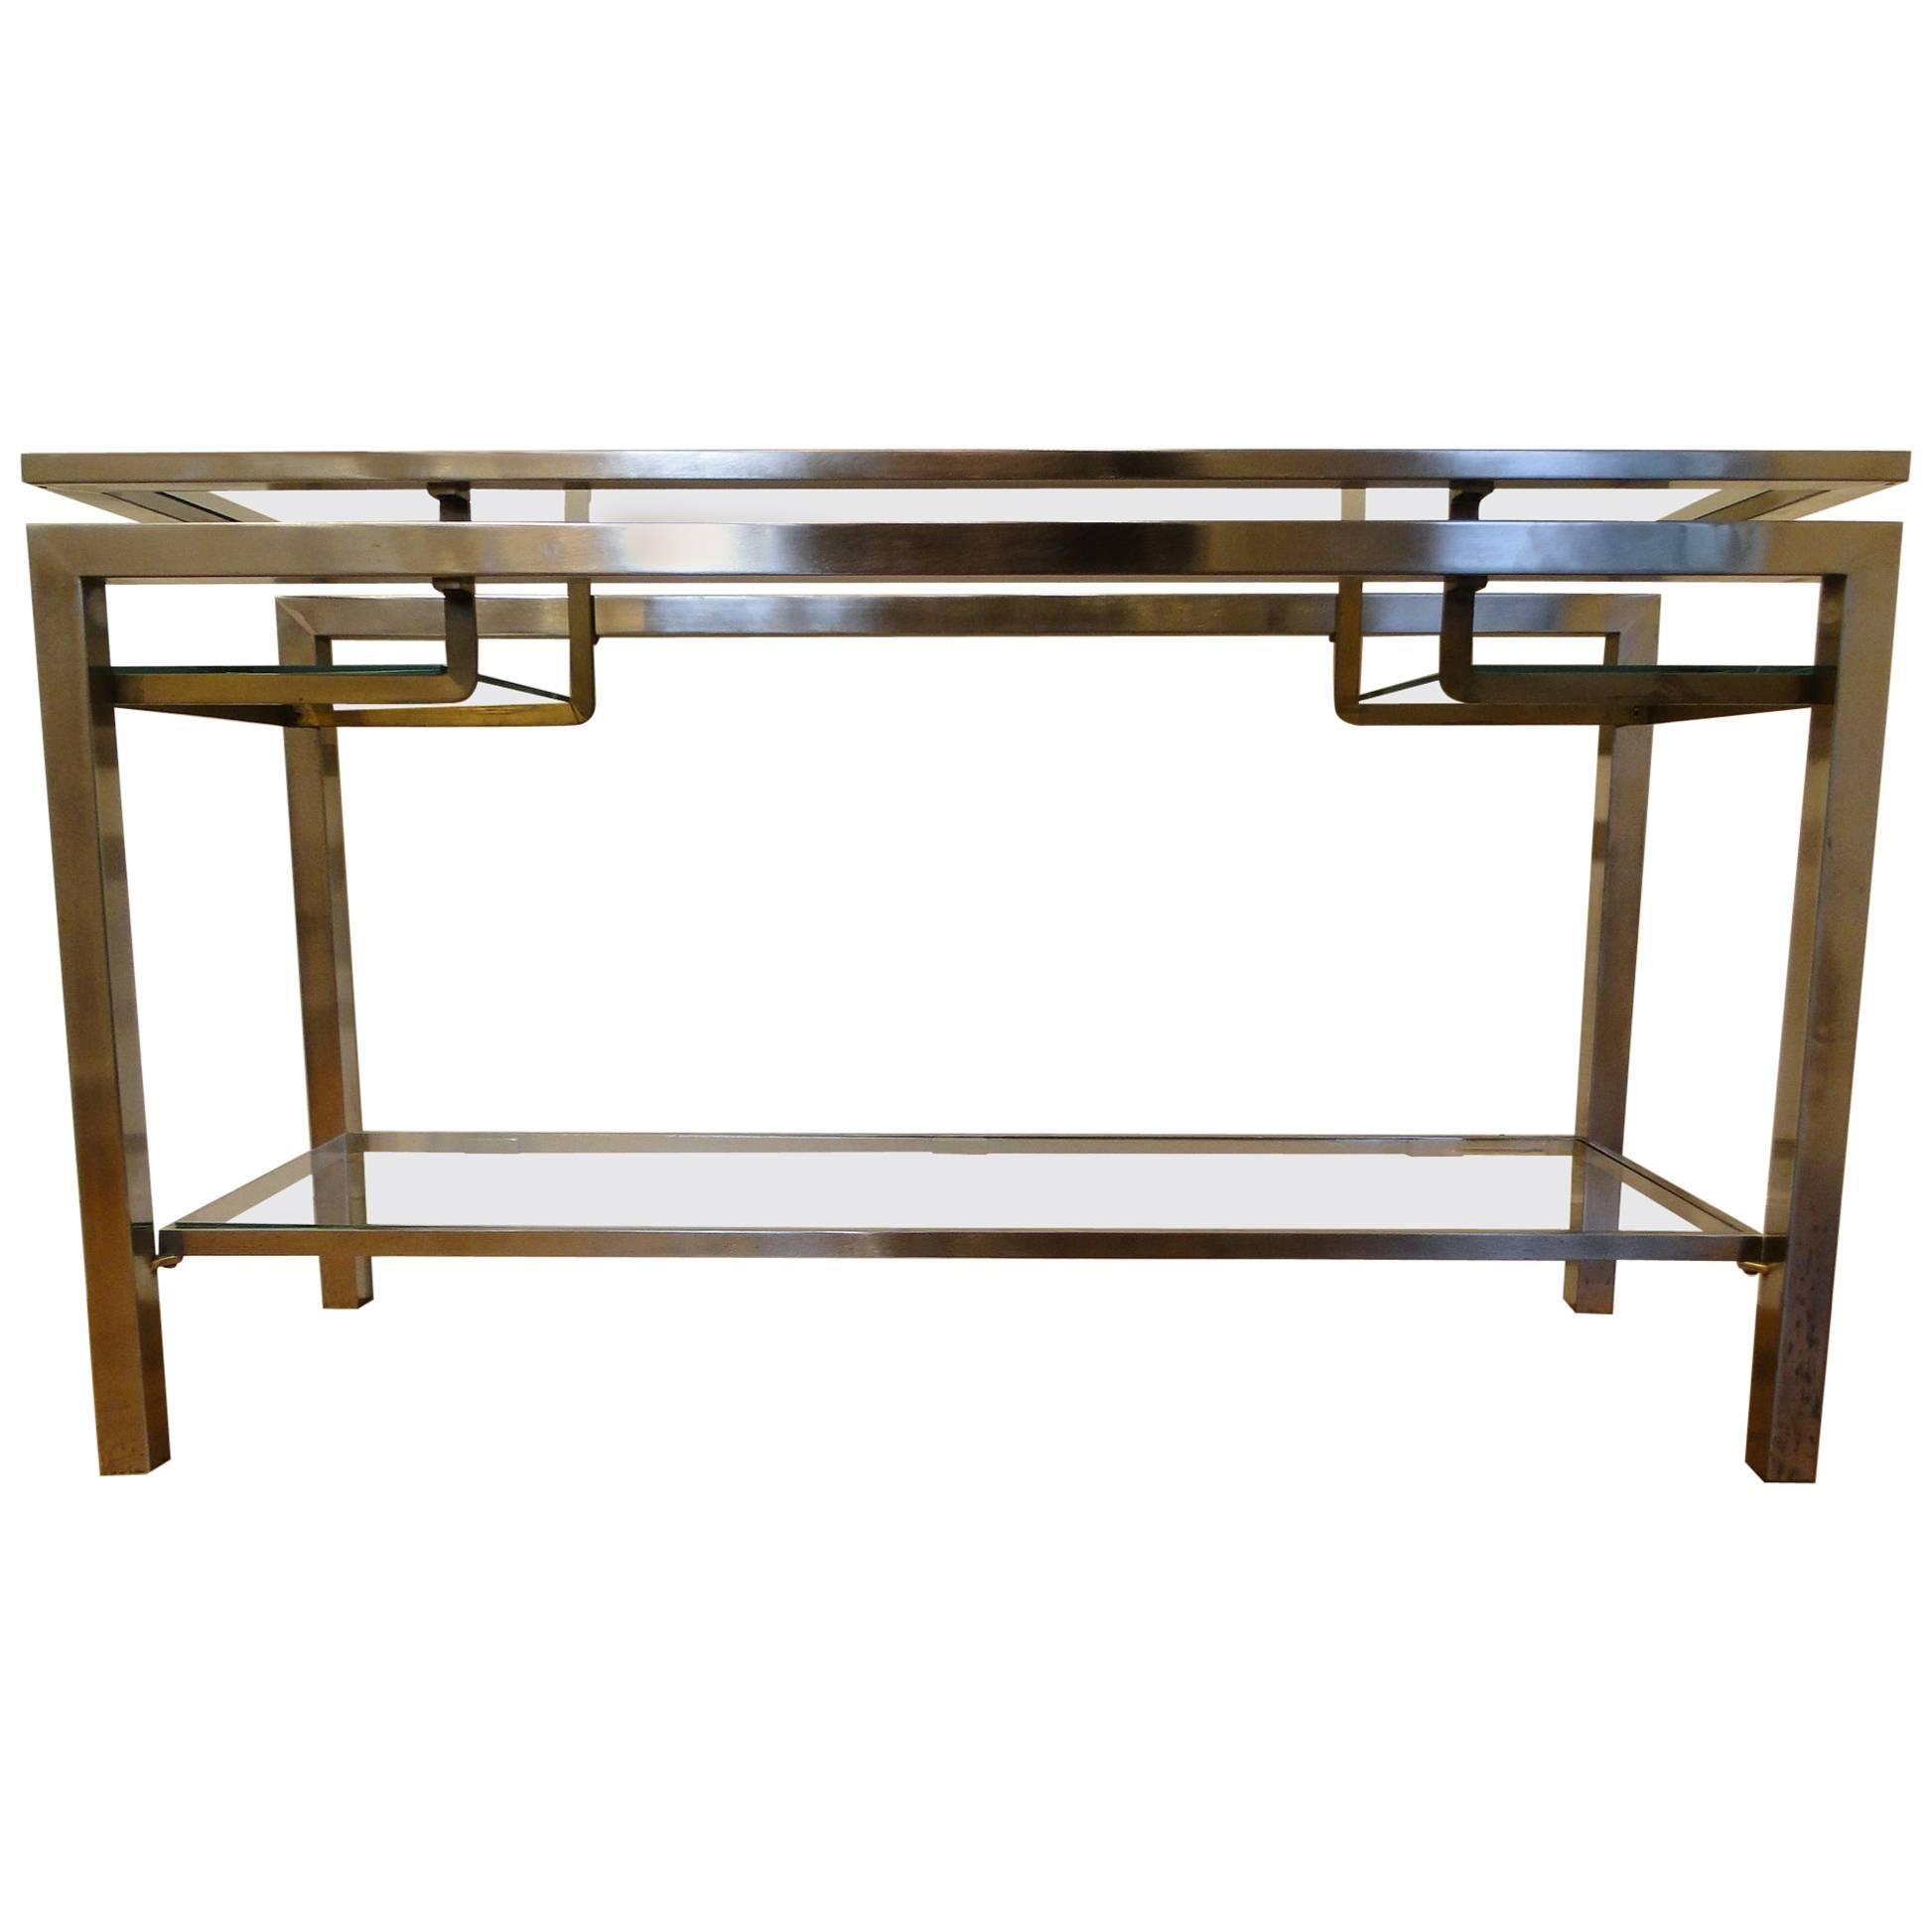 Guy Lefevre France, 1970 Stainless Steel Console with Double Tops